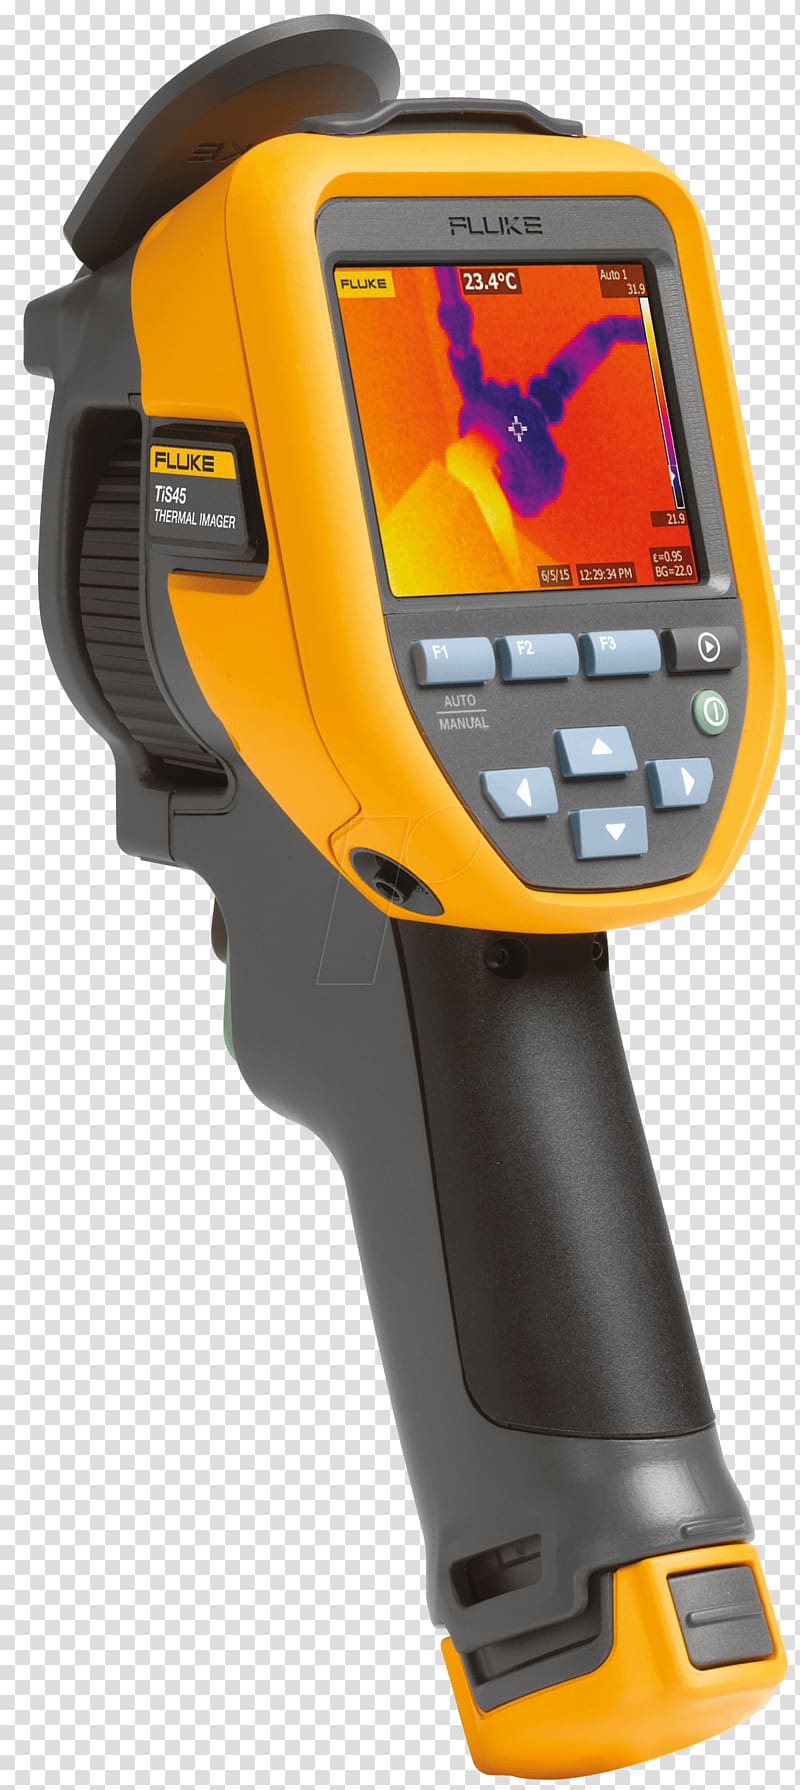 Thermographic camera Thermography Fluke Corporation Thermal imaging camera, Camera transparent background PNG clipart